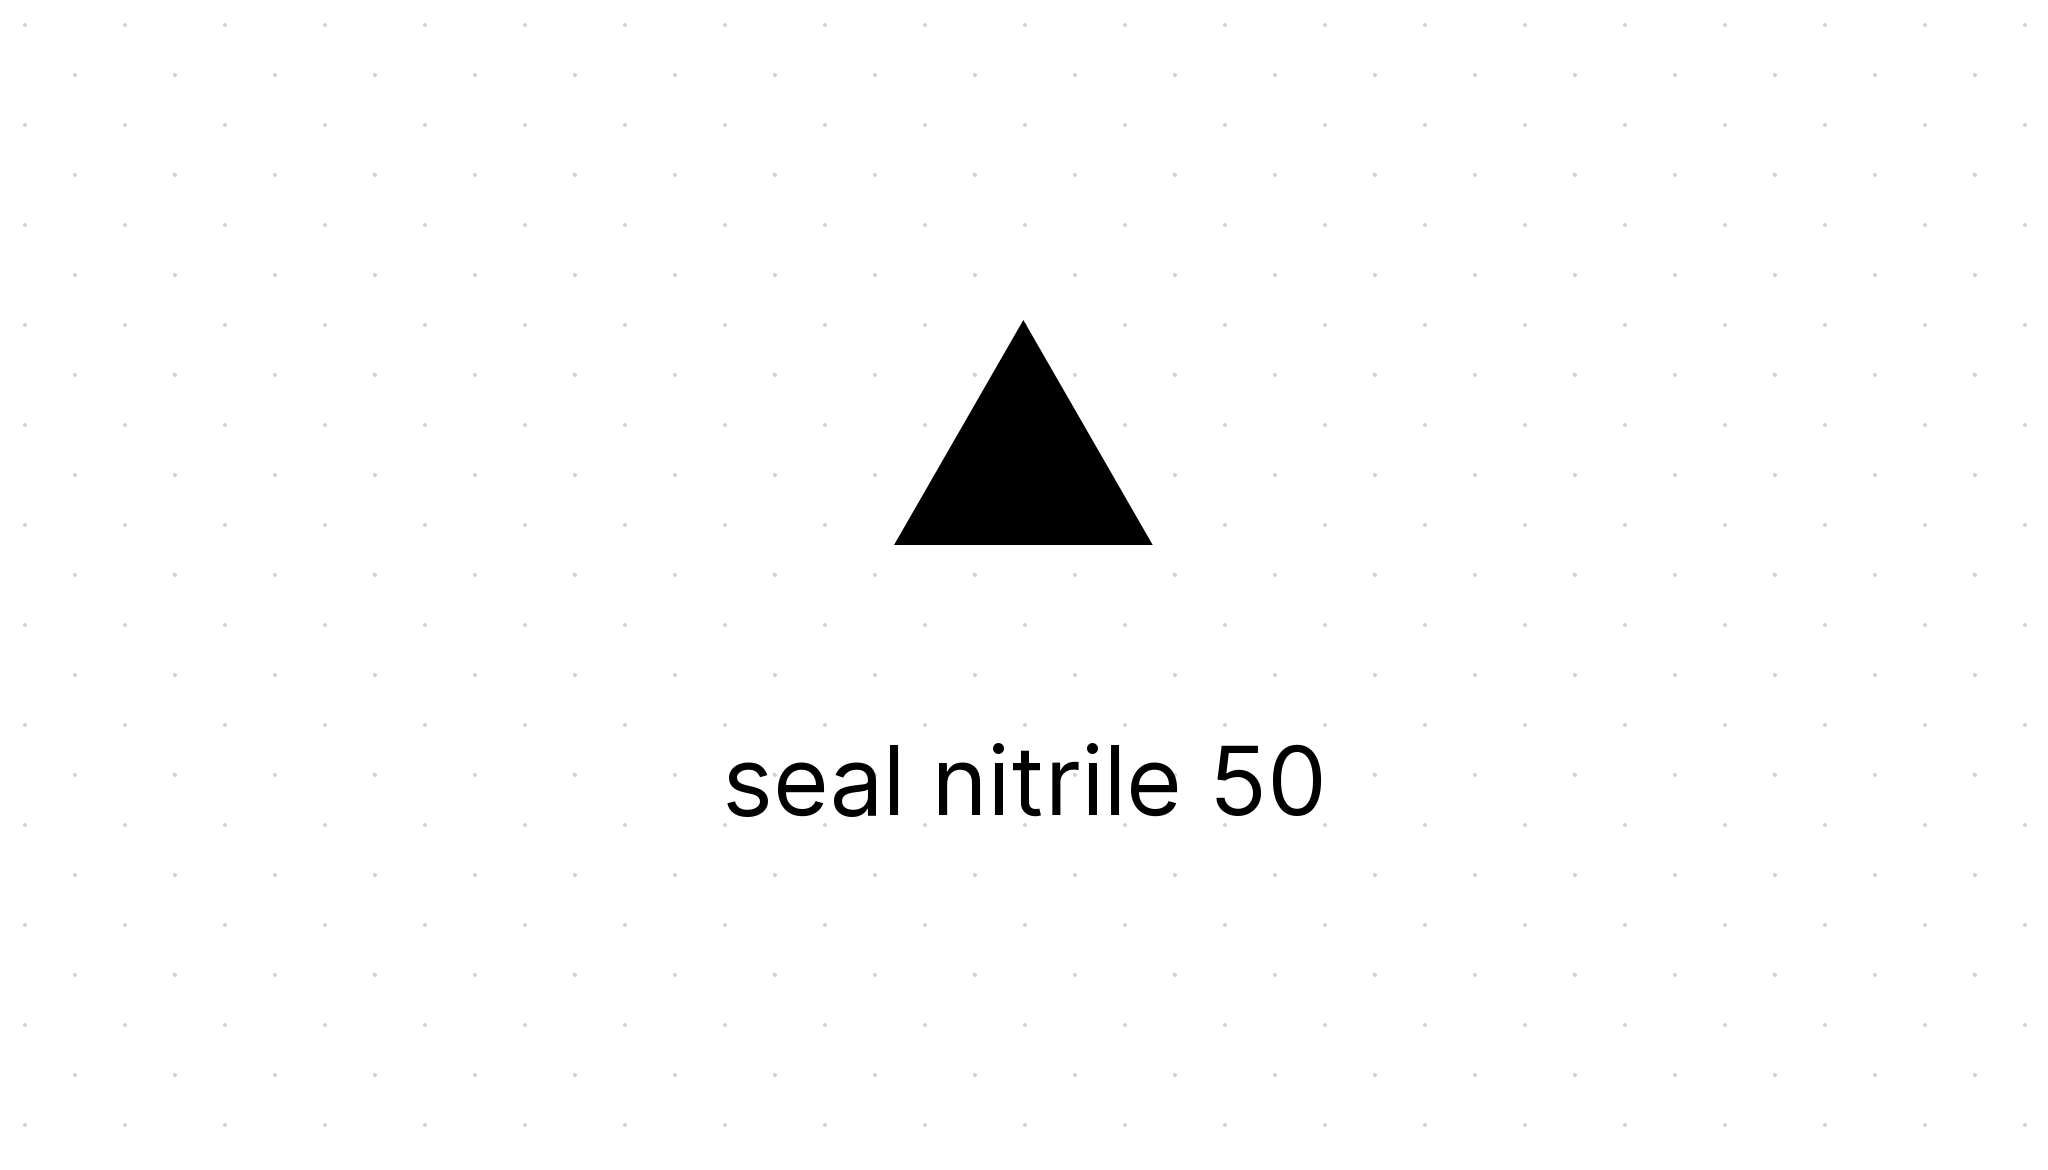 RS PRO Nitrile Rubber Seal, 50mm ID, 72mm OD, 8mm